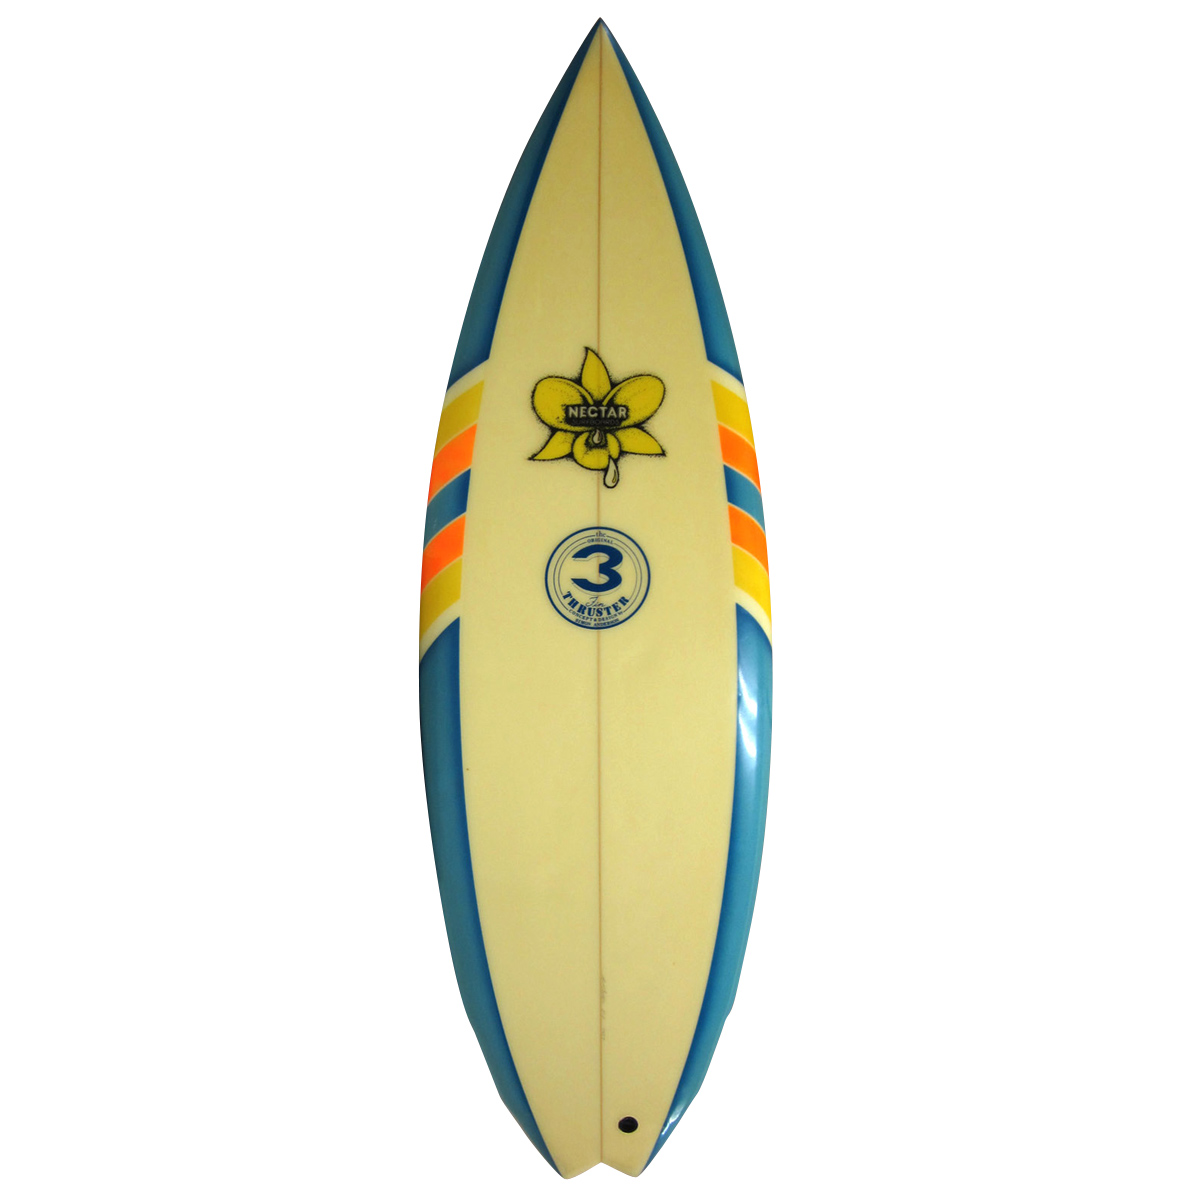  / Nectar Surfboards / 5`7 Thruster Vintage Shaped By Gary MacNabb 